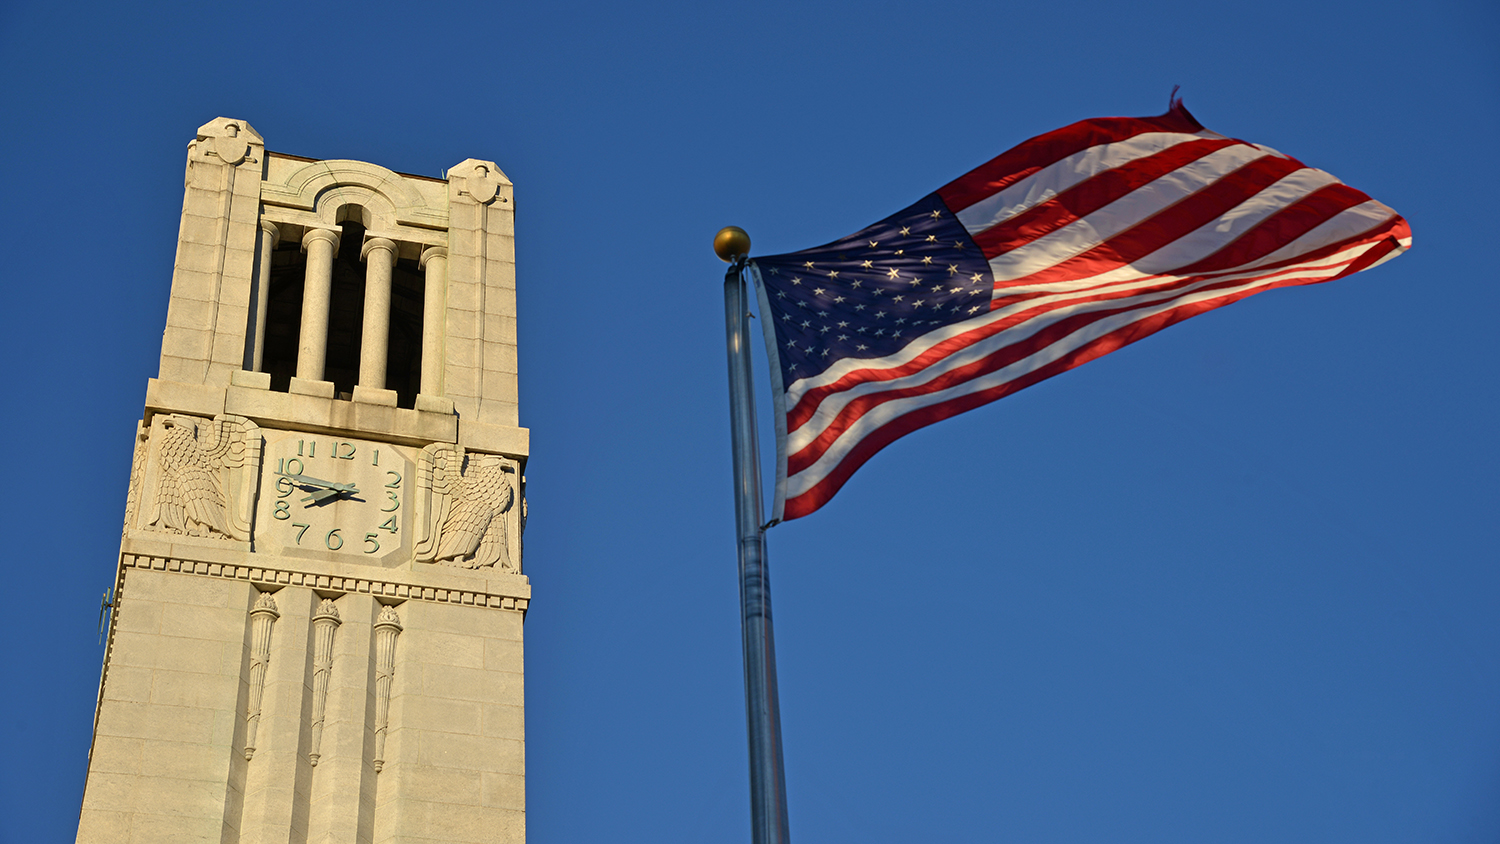 NC State belltower and US flag in early morning light.